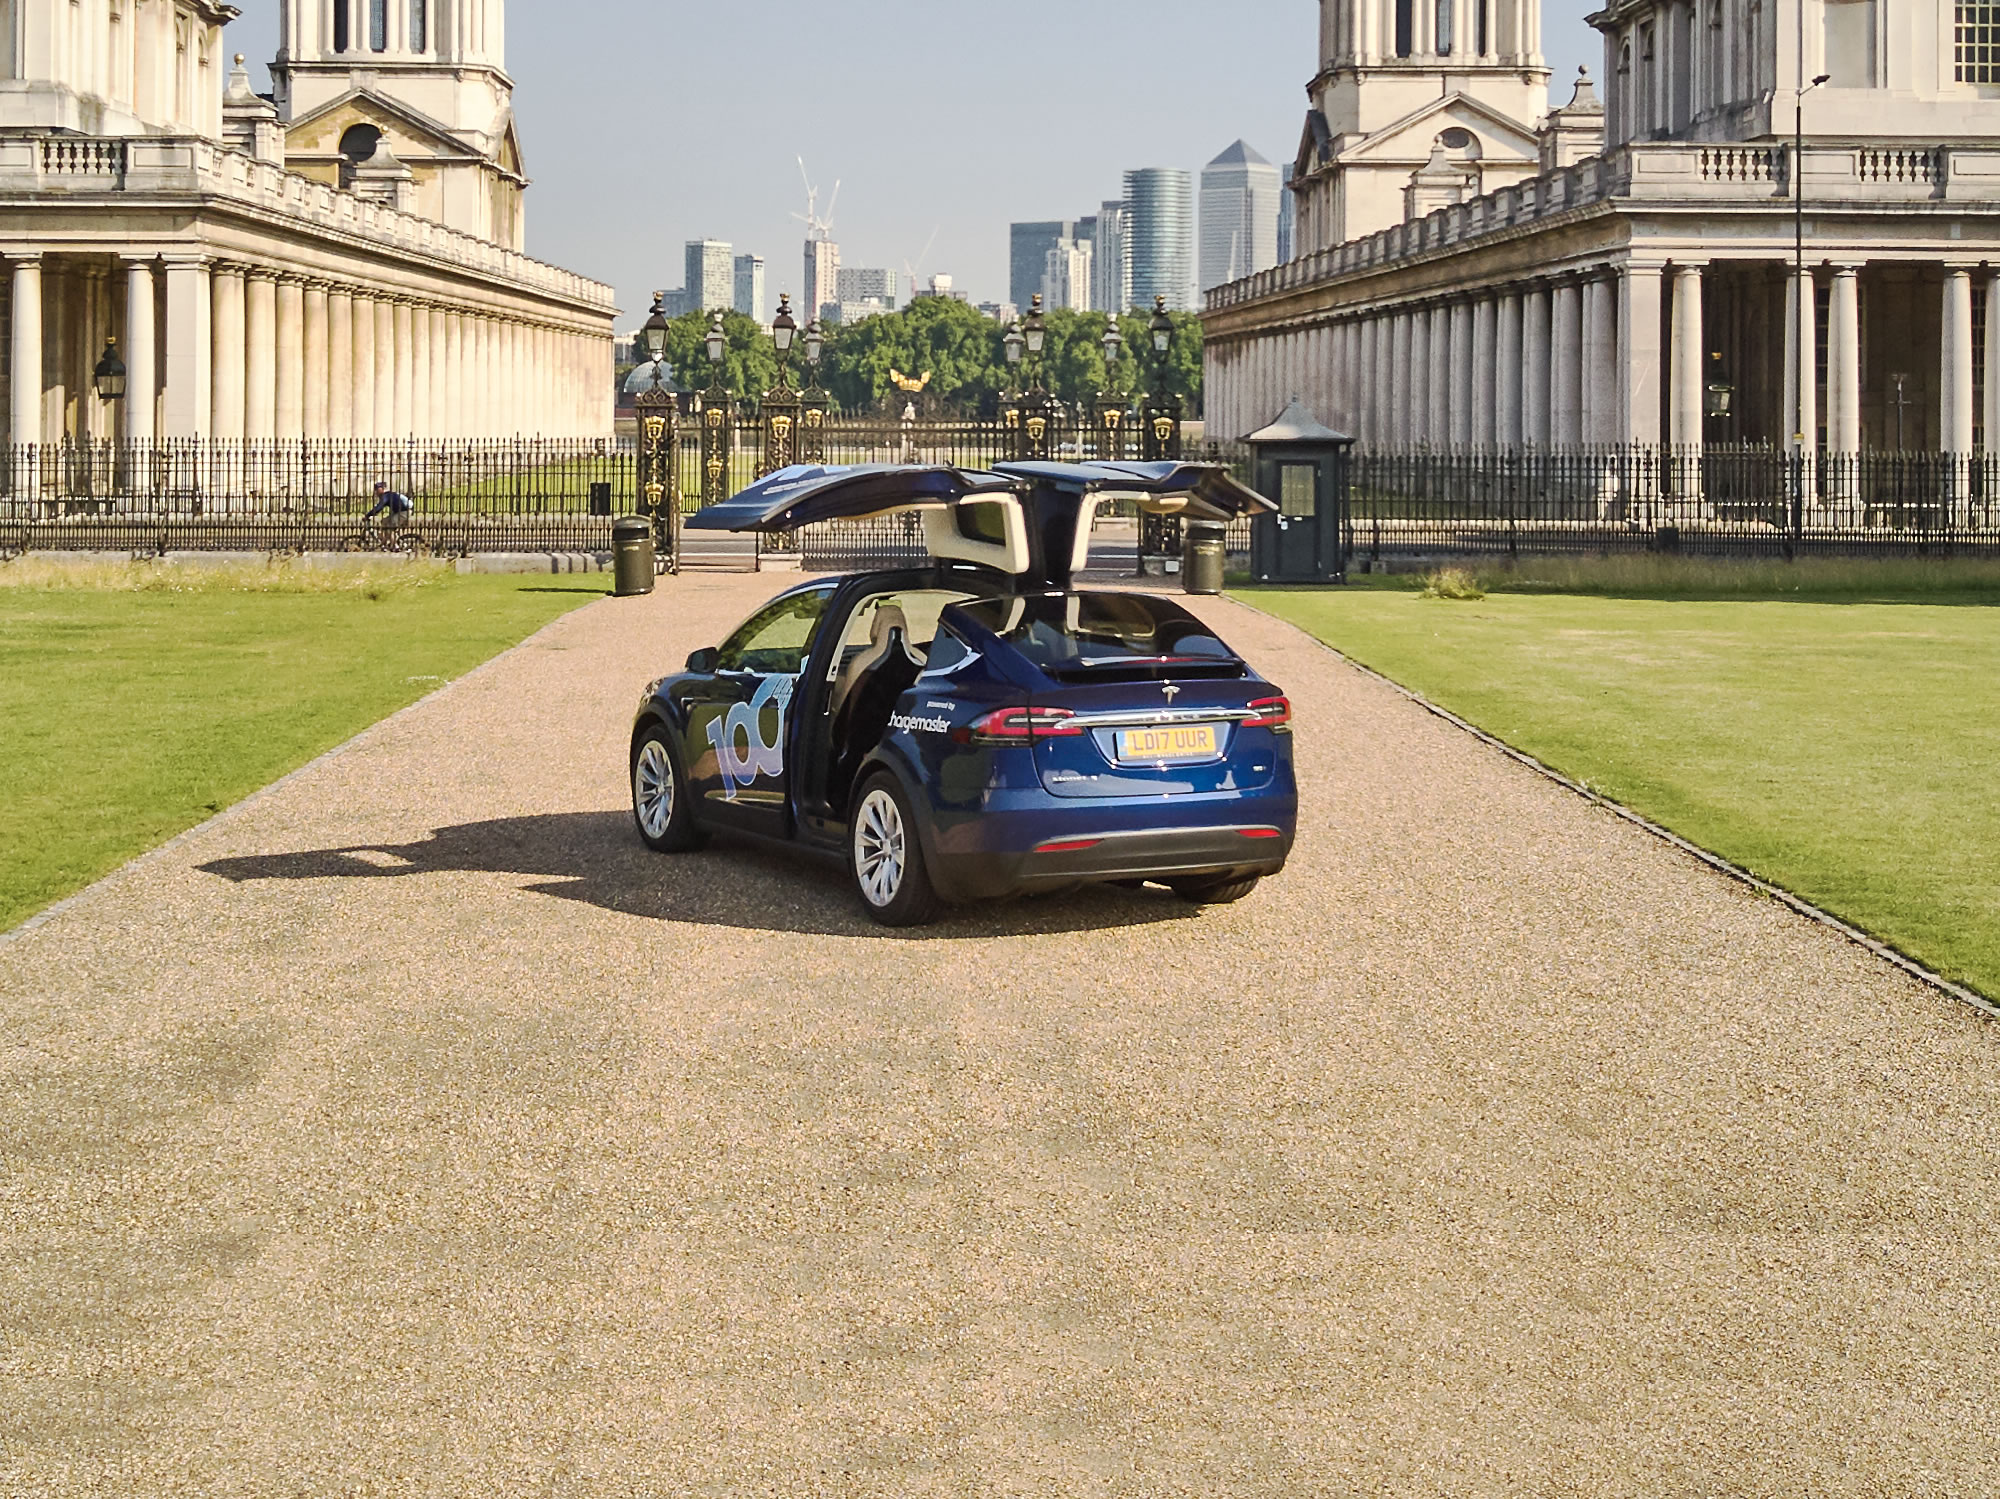 Tesla X type vehicle in the Greenwich area of London overlooking the city financial district